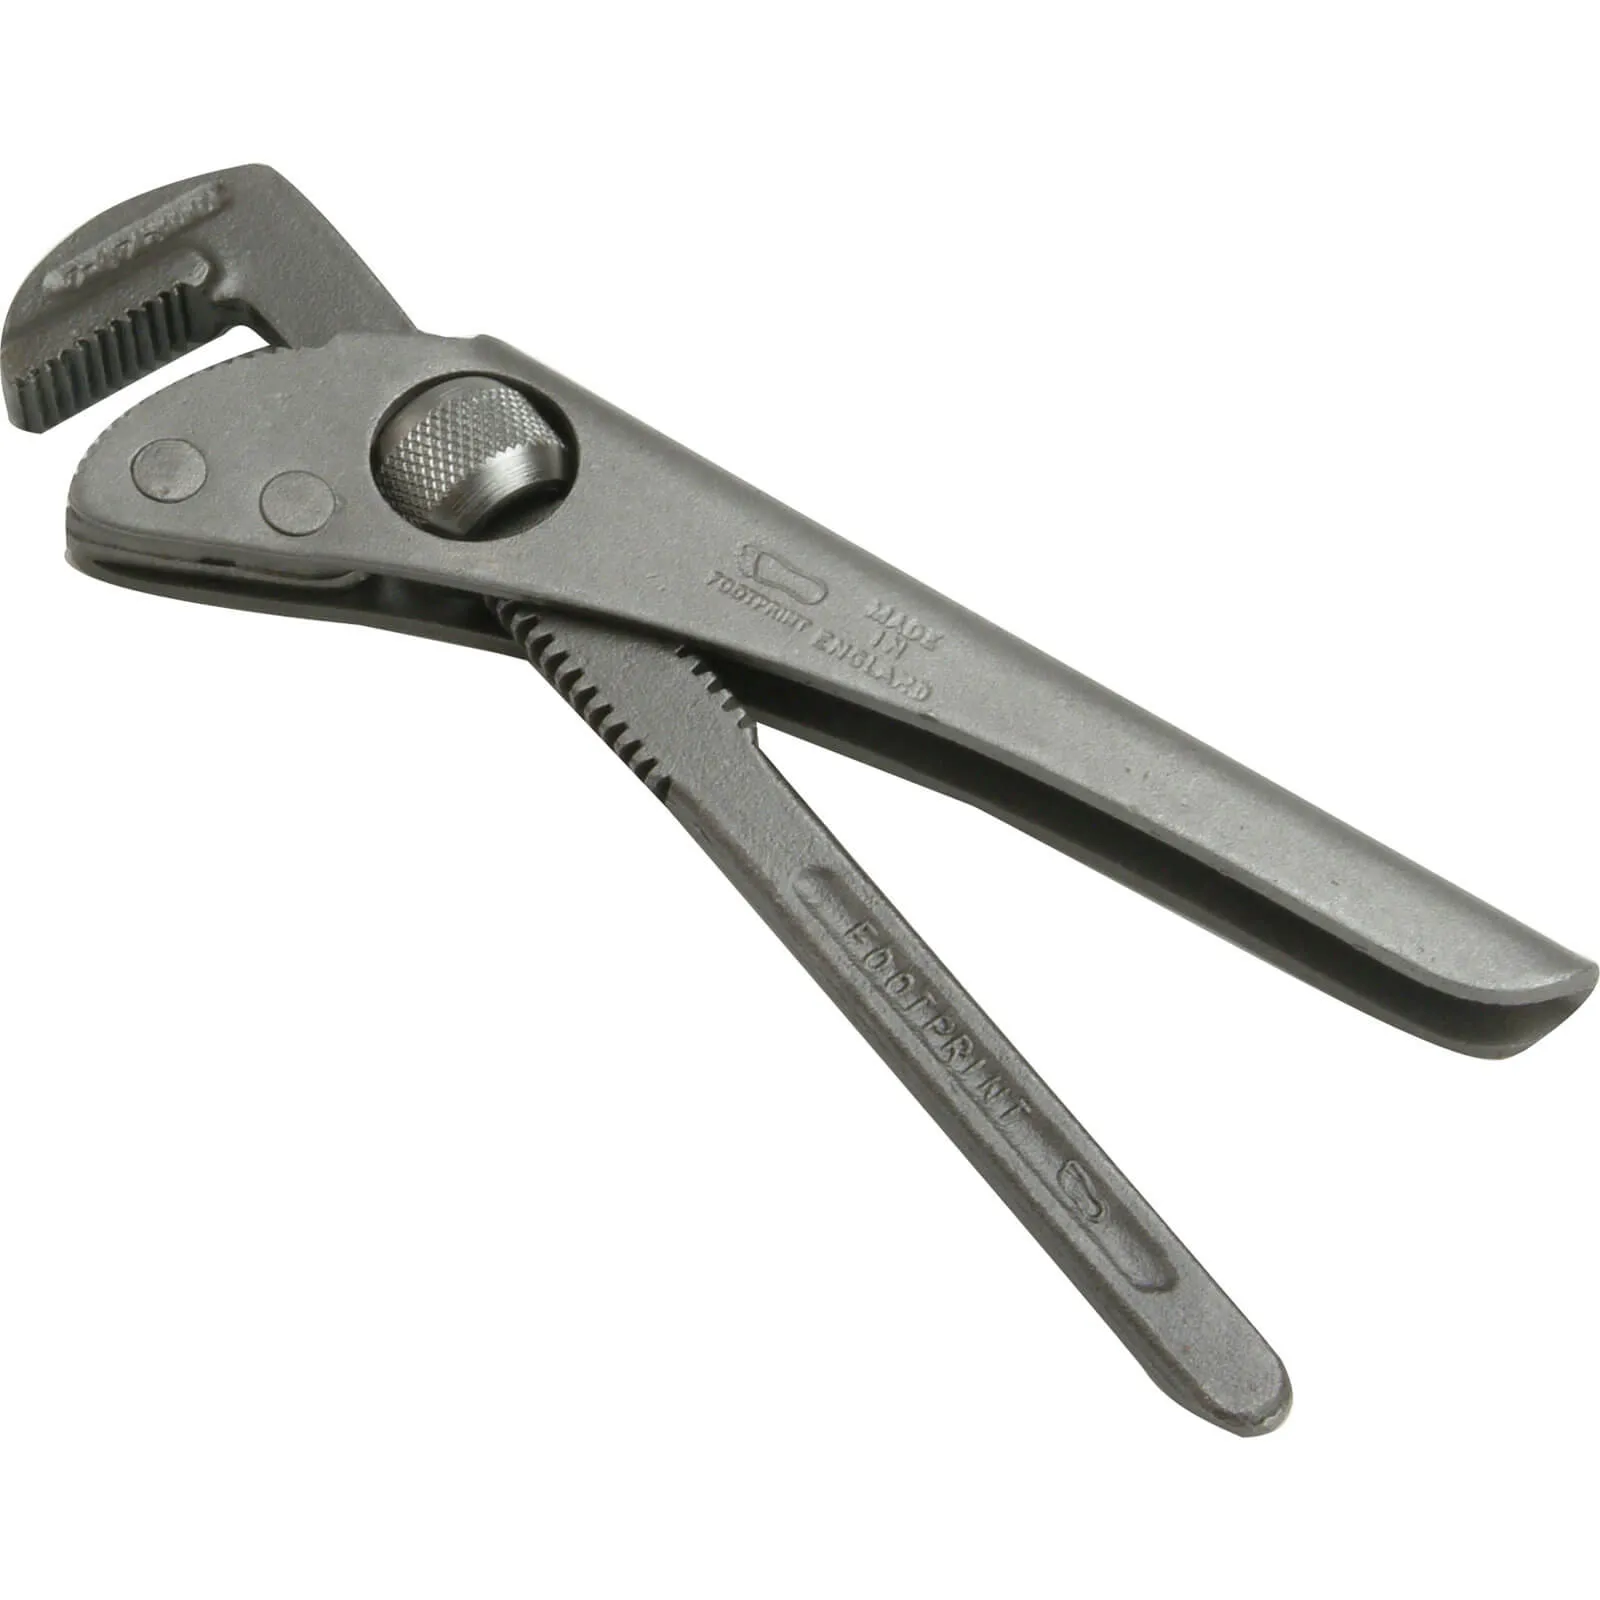 Footprint Pipe Wrench Thumbturn Pattern - 7" / 175mm